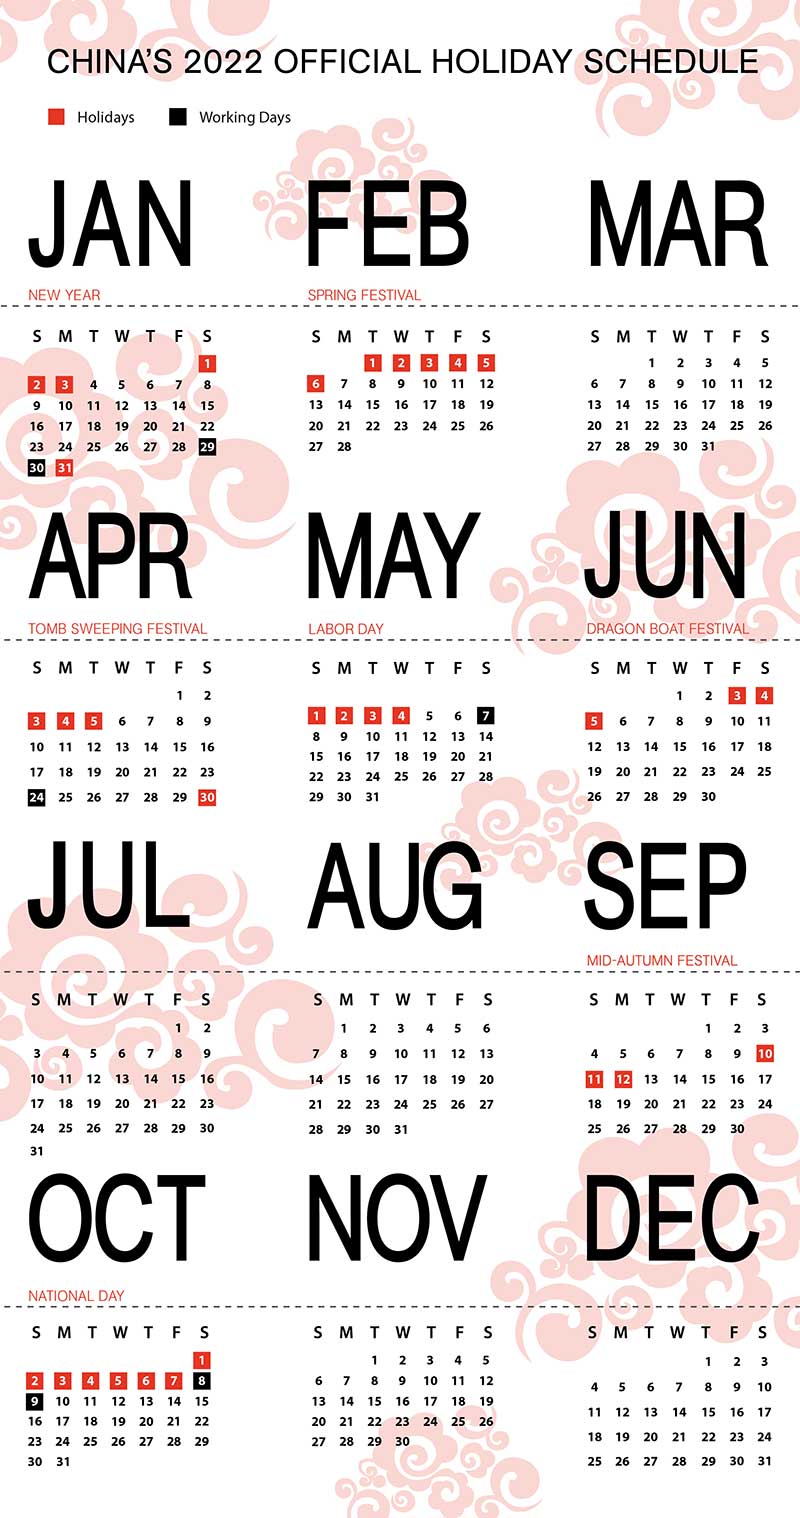 China Public Holiday 2022 Schedule Released - China Briefing News